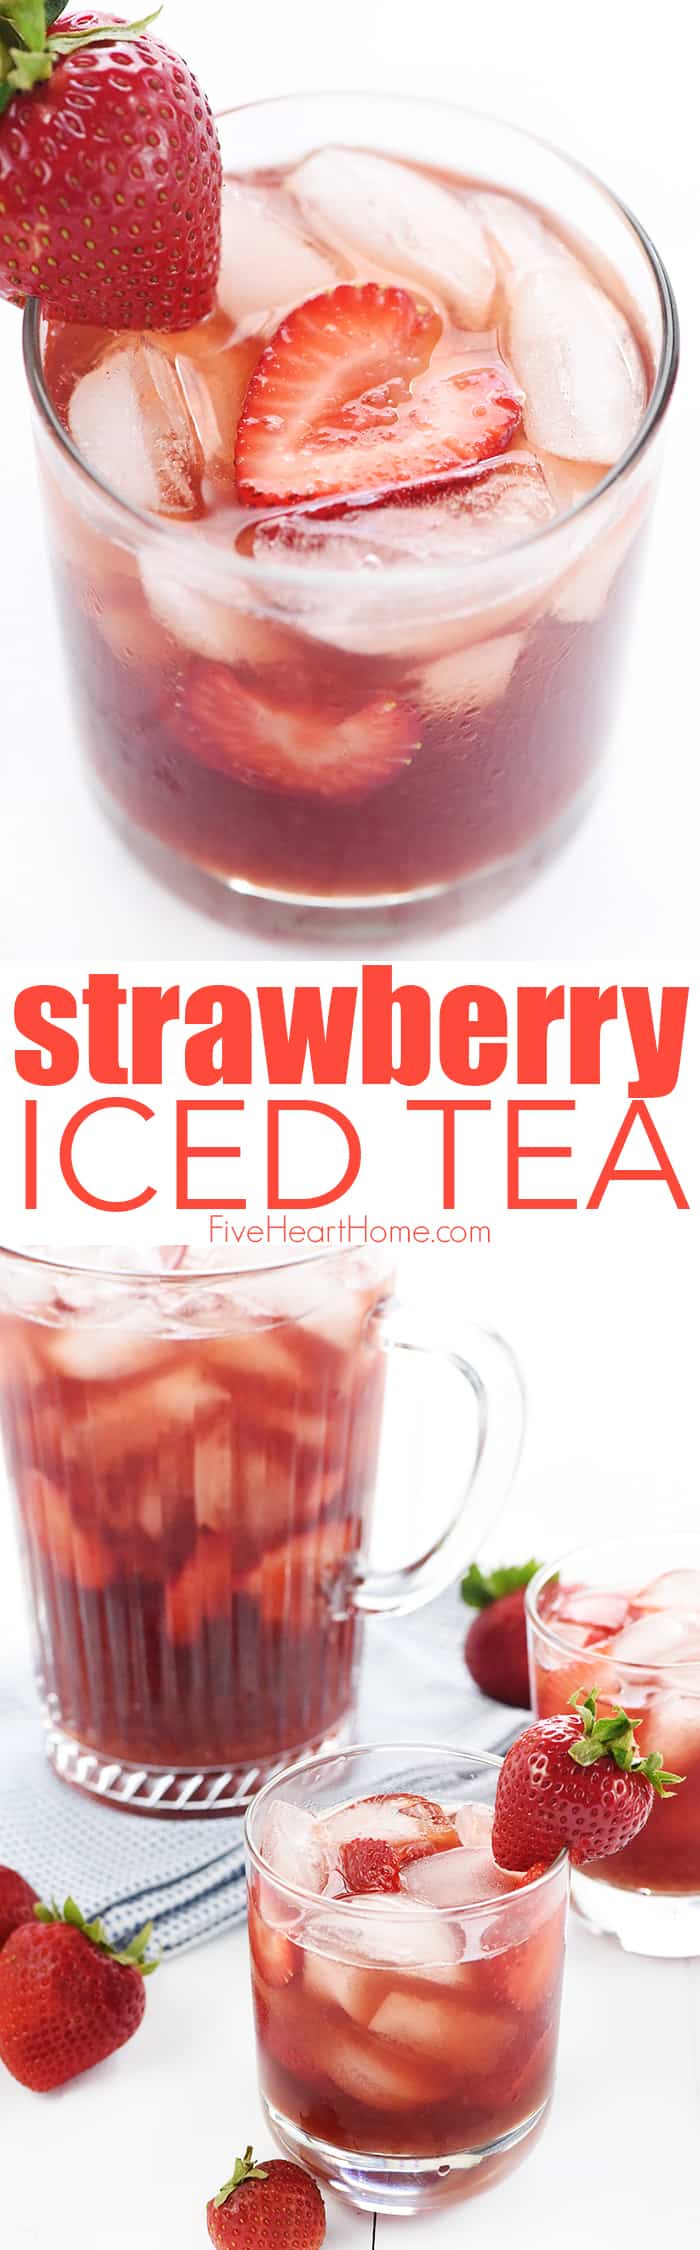 Strawberry Iced Tea ~ this refreshing summer drink is made with sweet, fresh, homemade strawberry simple syrup! | FiveHeartHome.com via @fivehearthome